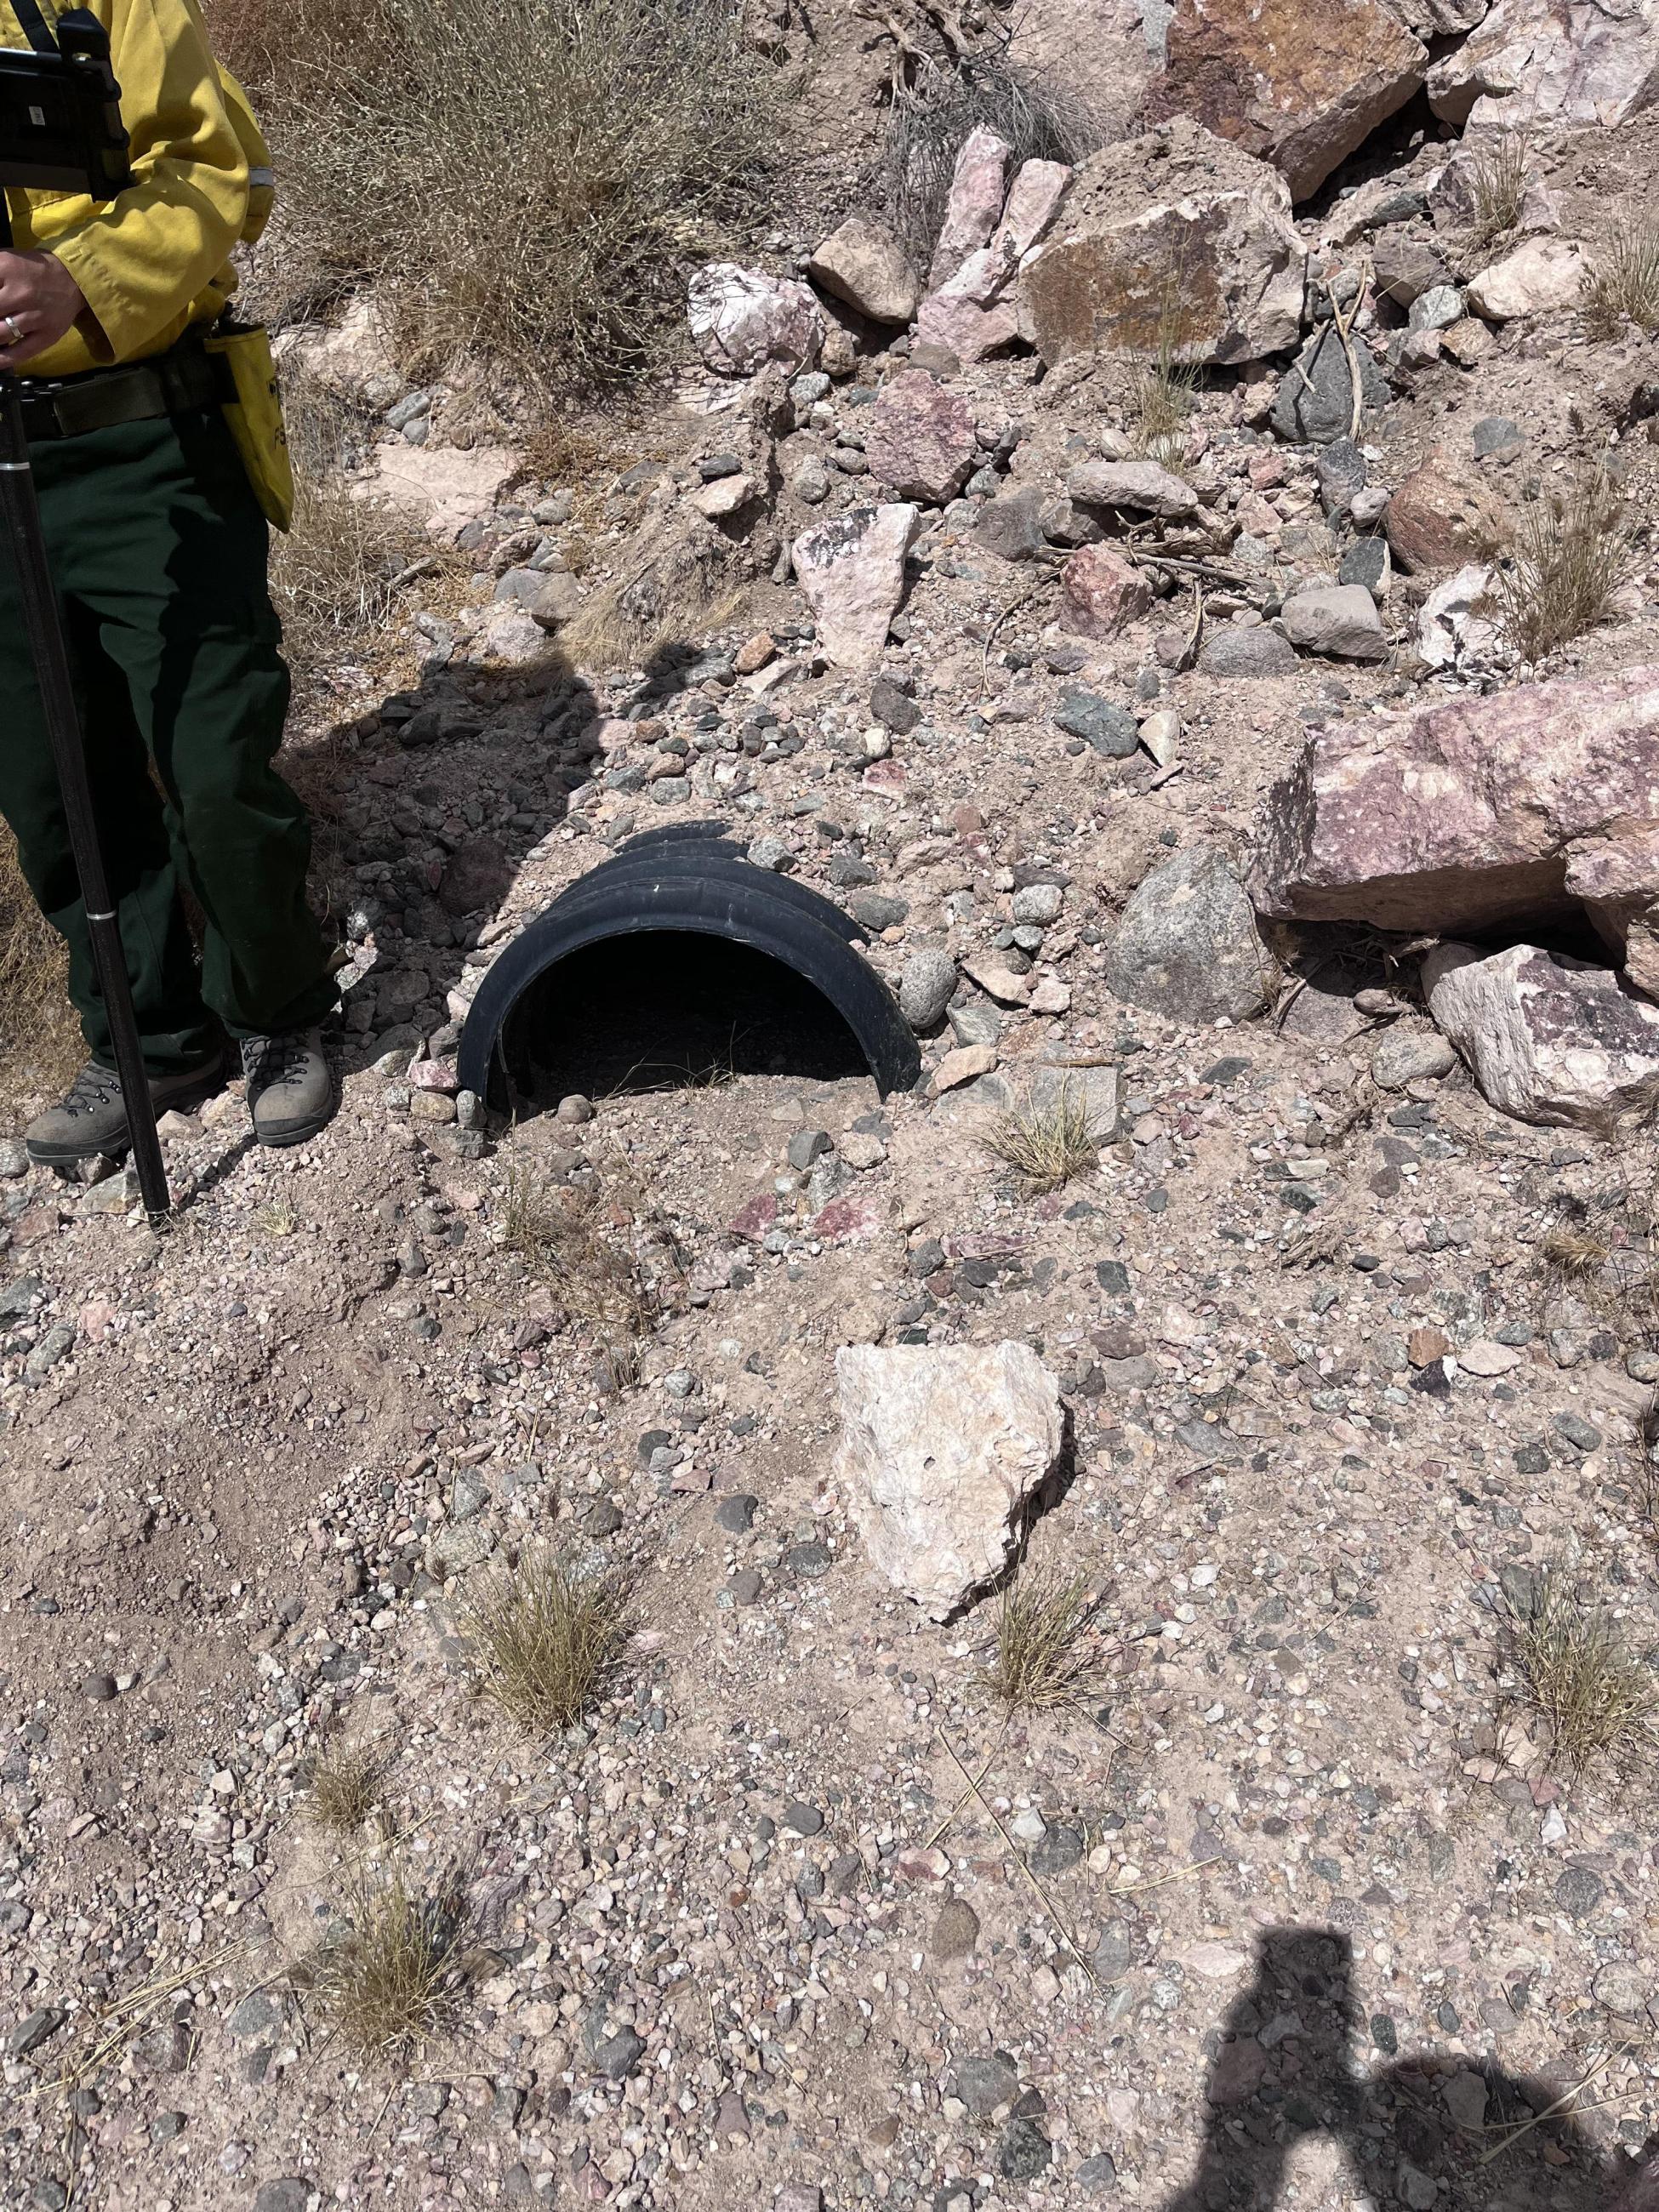 A USFWS scientist measures debris in a culvert after the York Fire 8/14/23